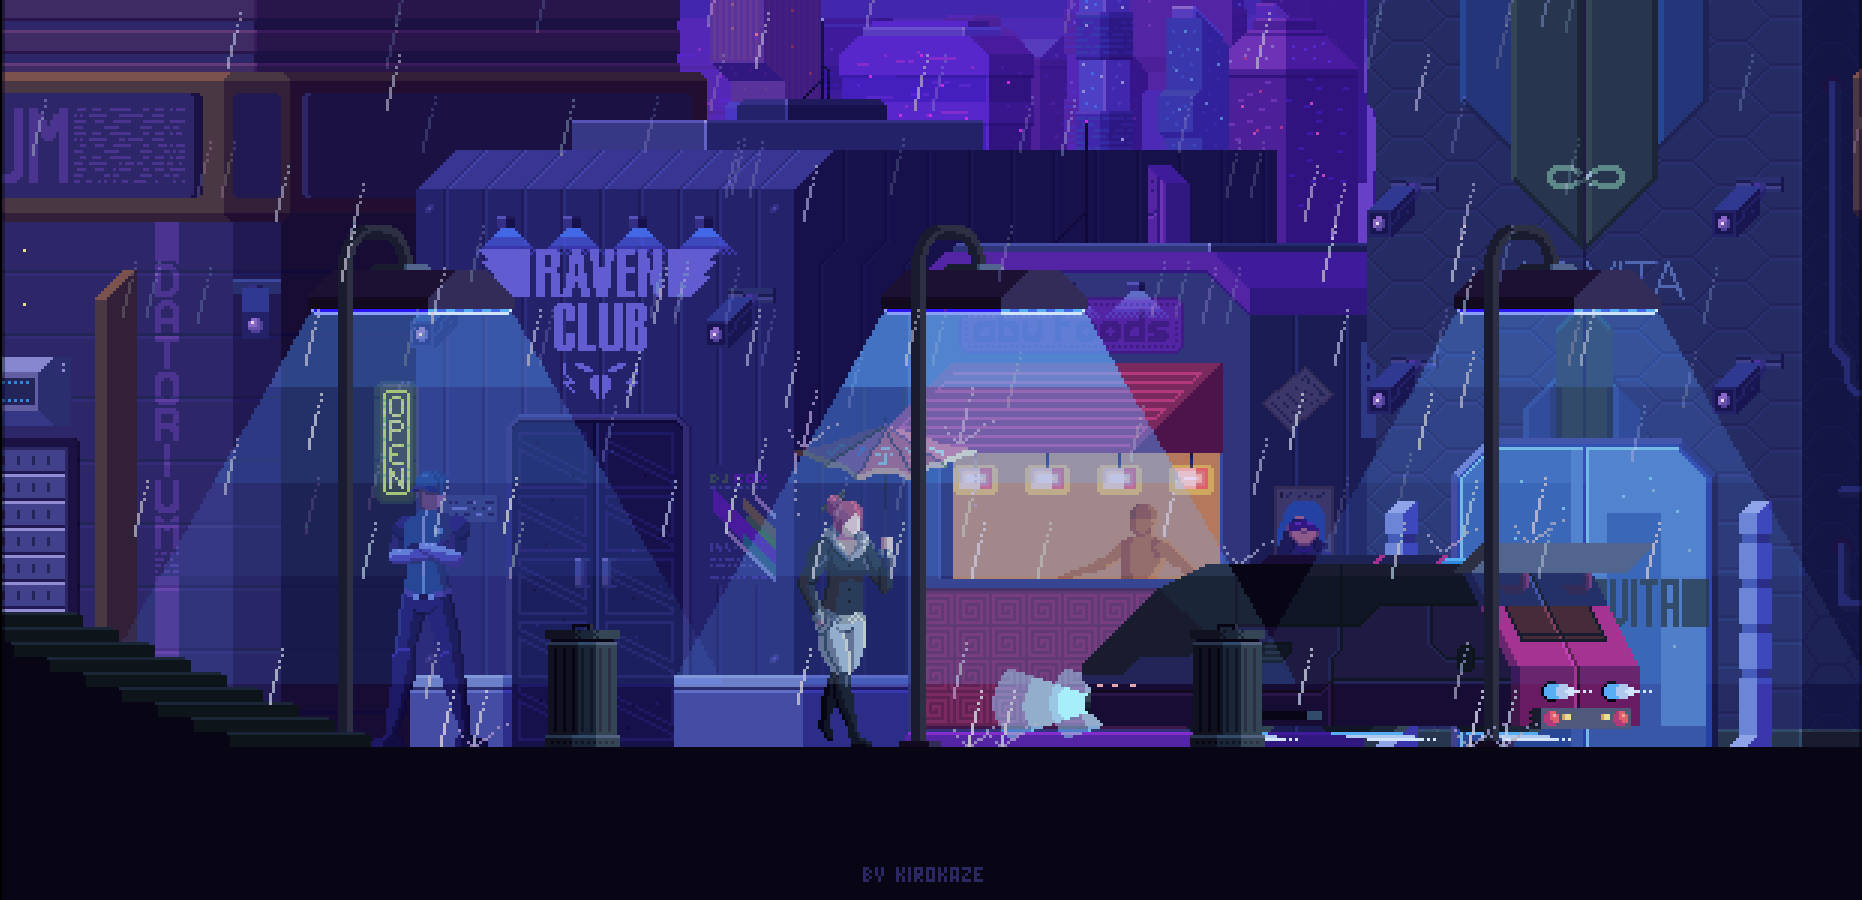 A City With People Walking In The Rain Wallpaper